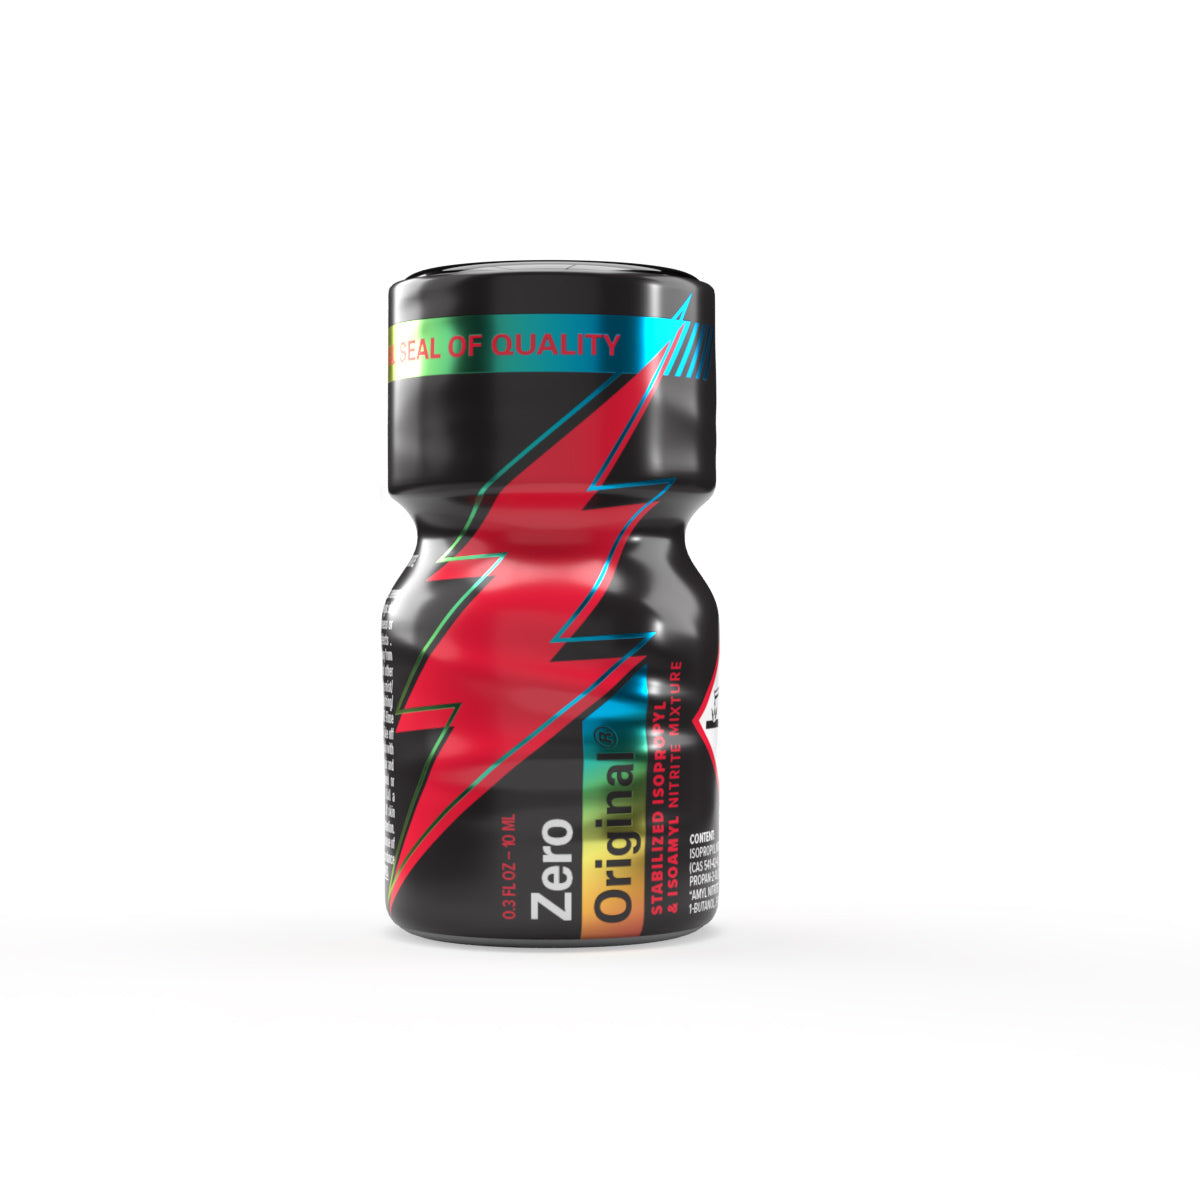 A product photo of a 10ml bottle of Original Zero Poppers.